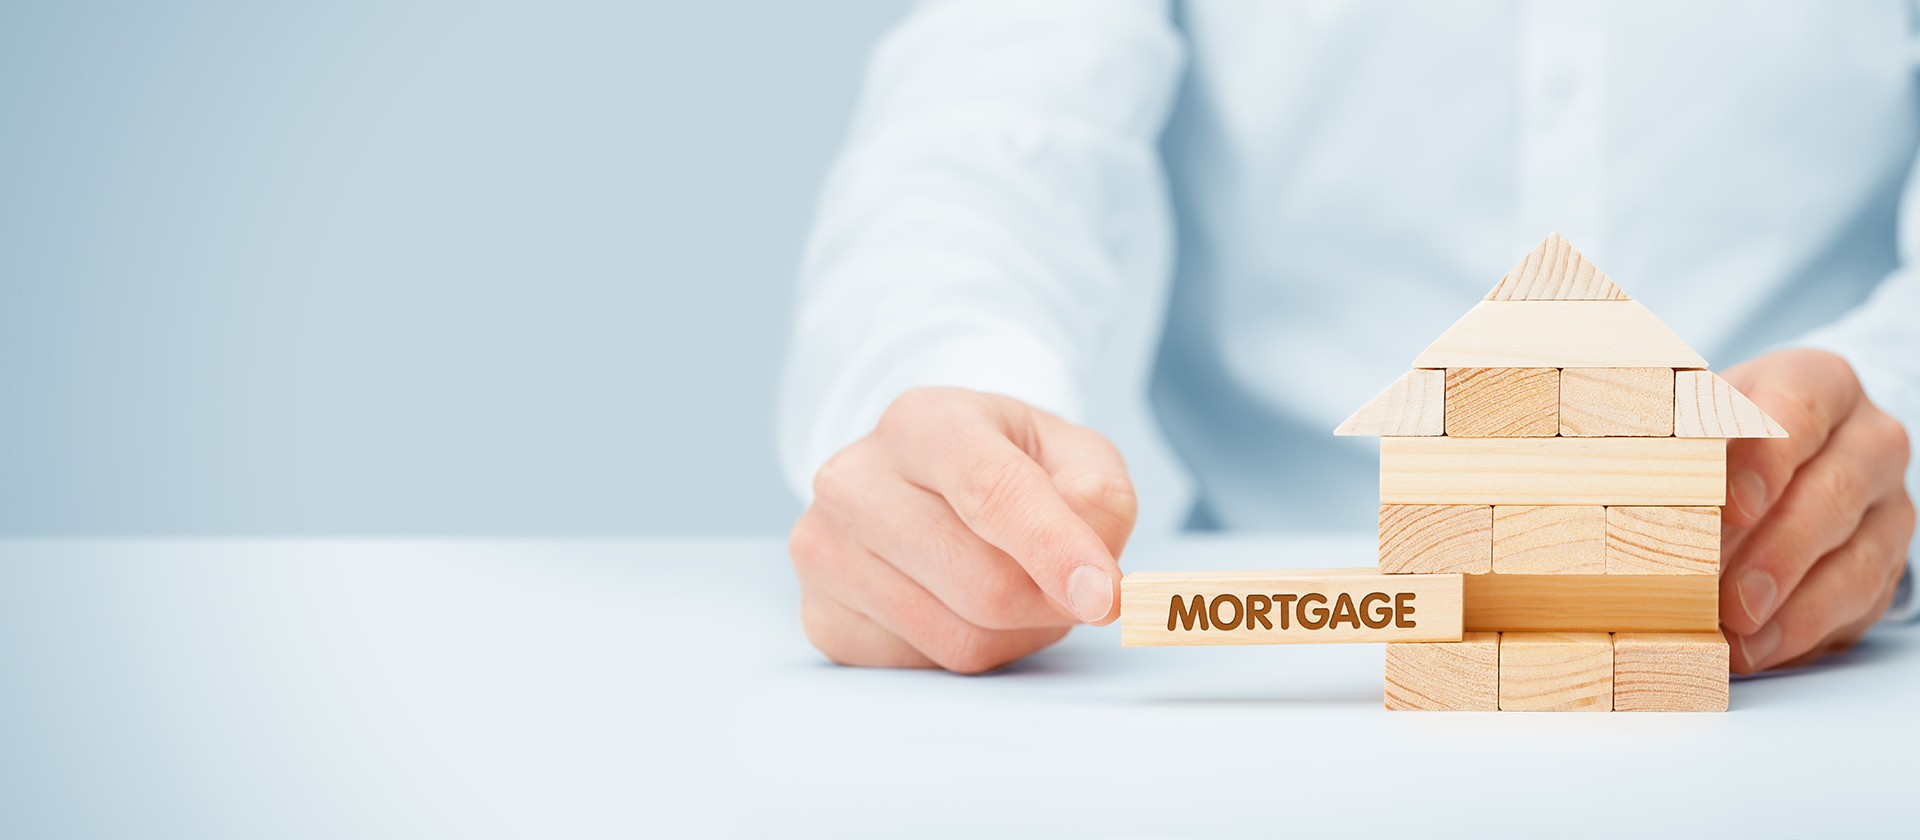 HMO Remortgages at Standard BTL Rates with BM Solutions